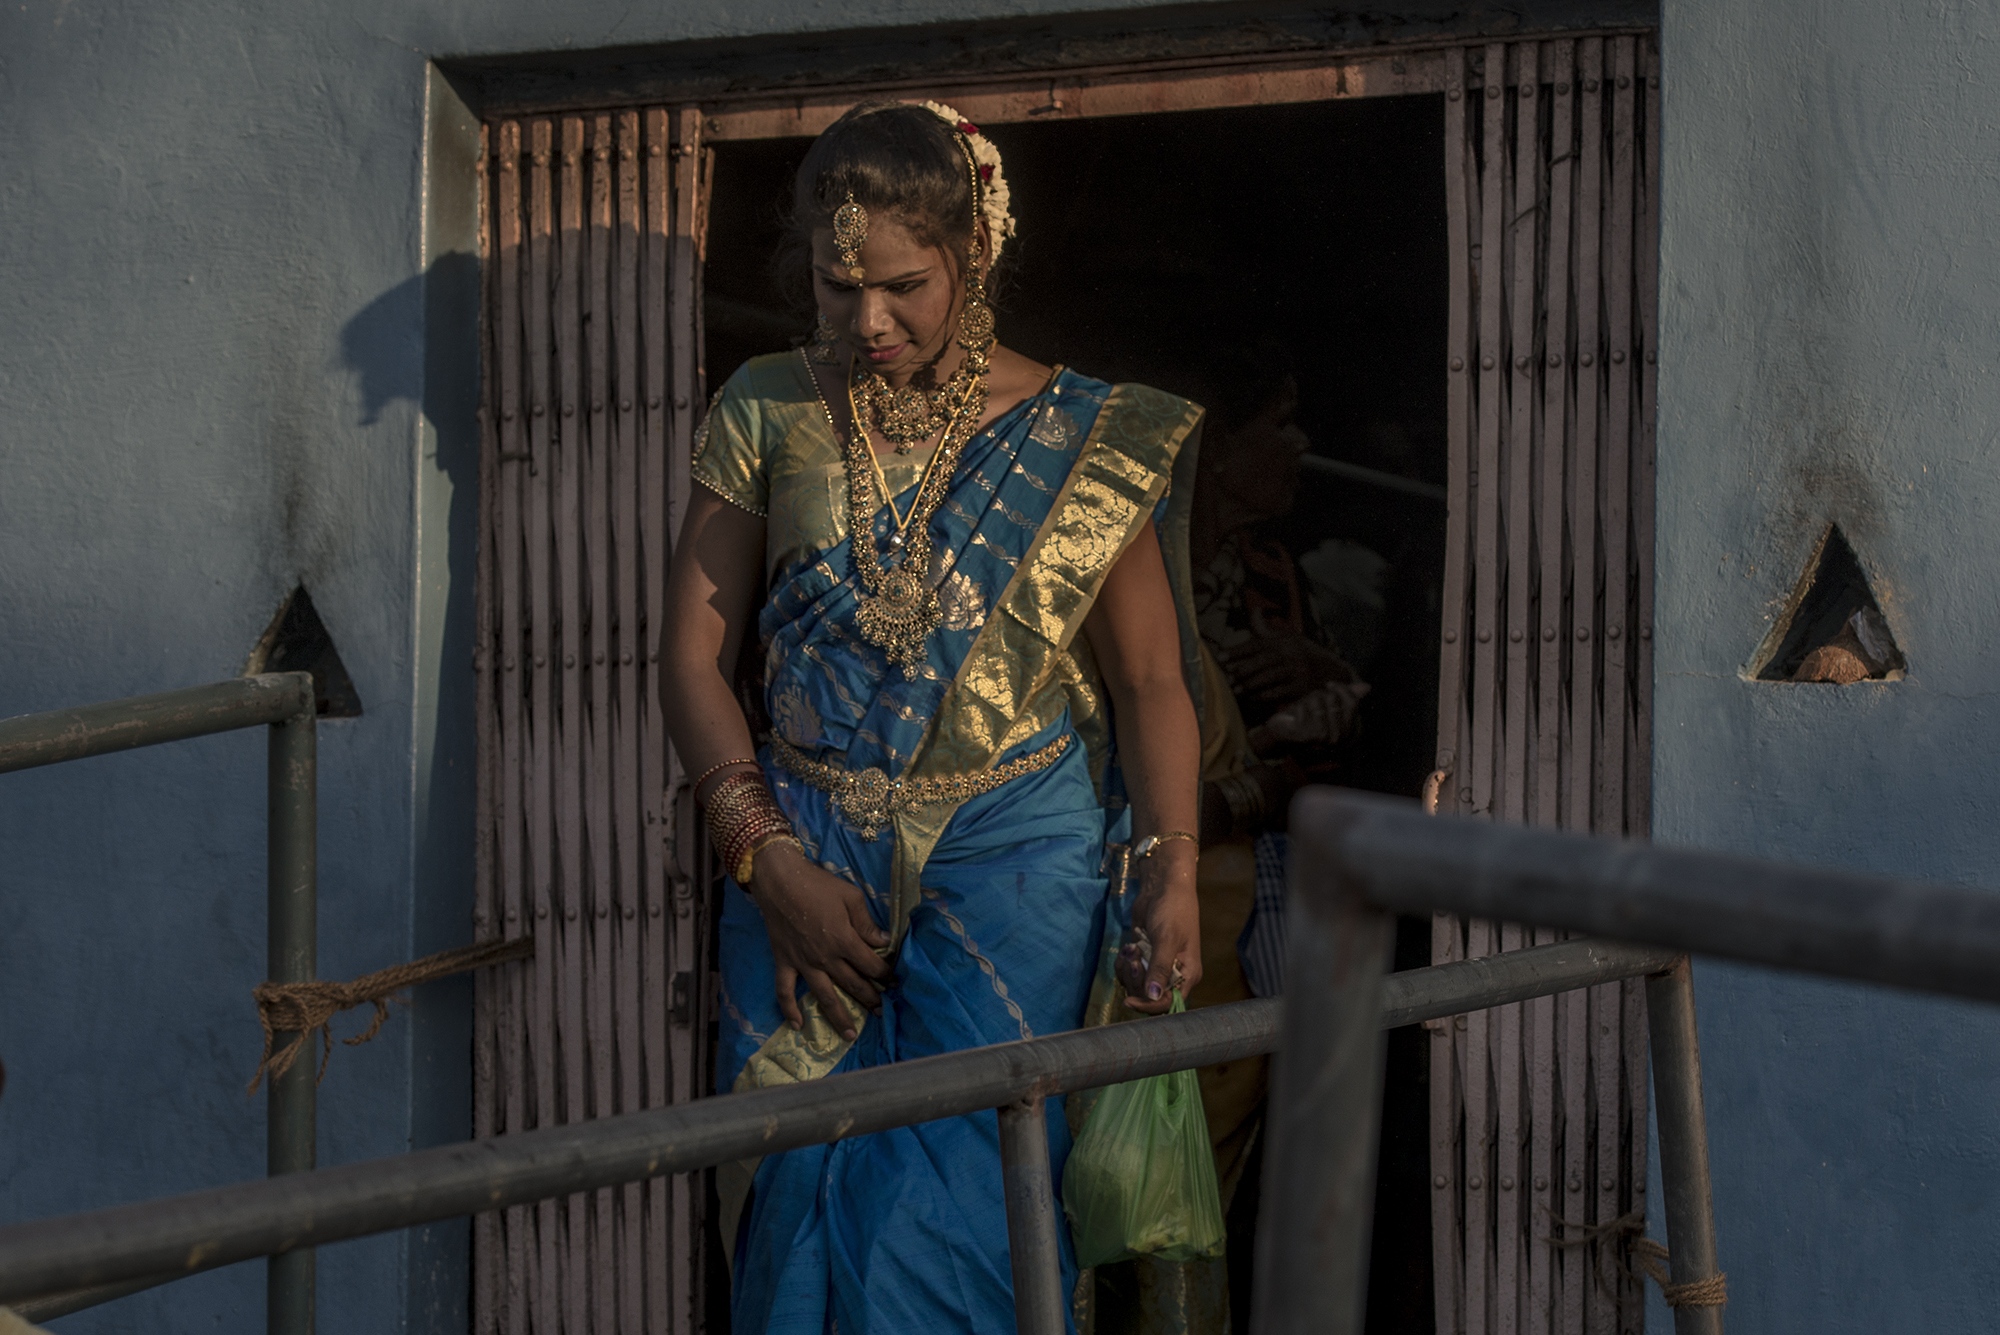 The Brides of Lord Aravan - Transgender Ambika comes out after ties of yellow thread